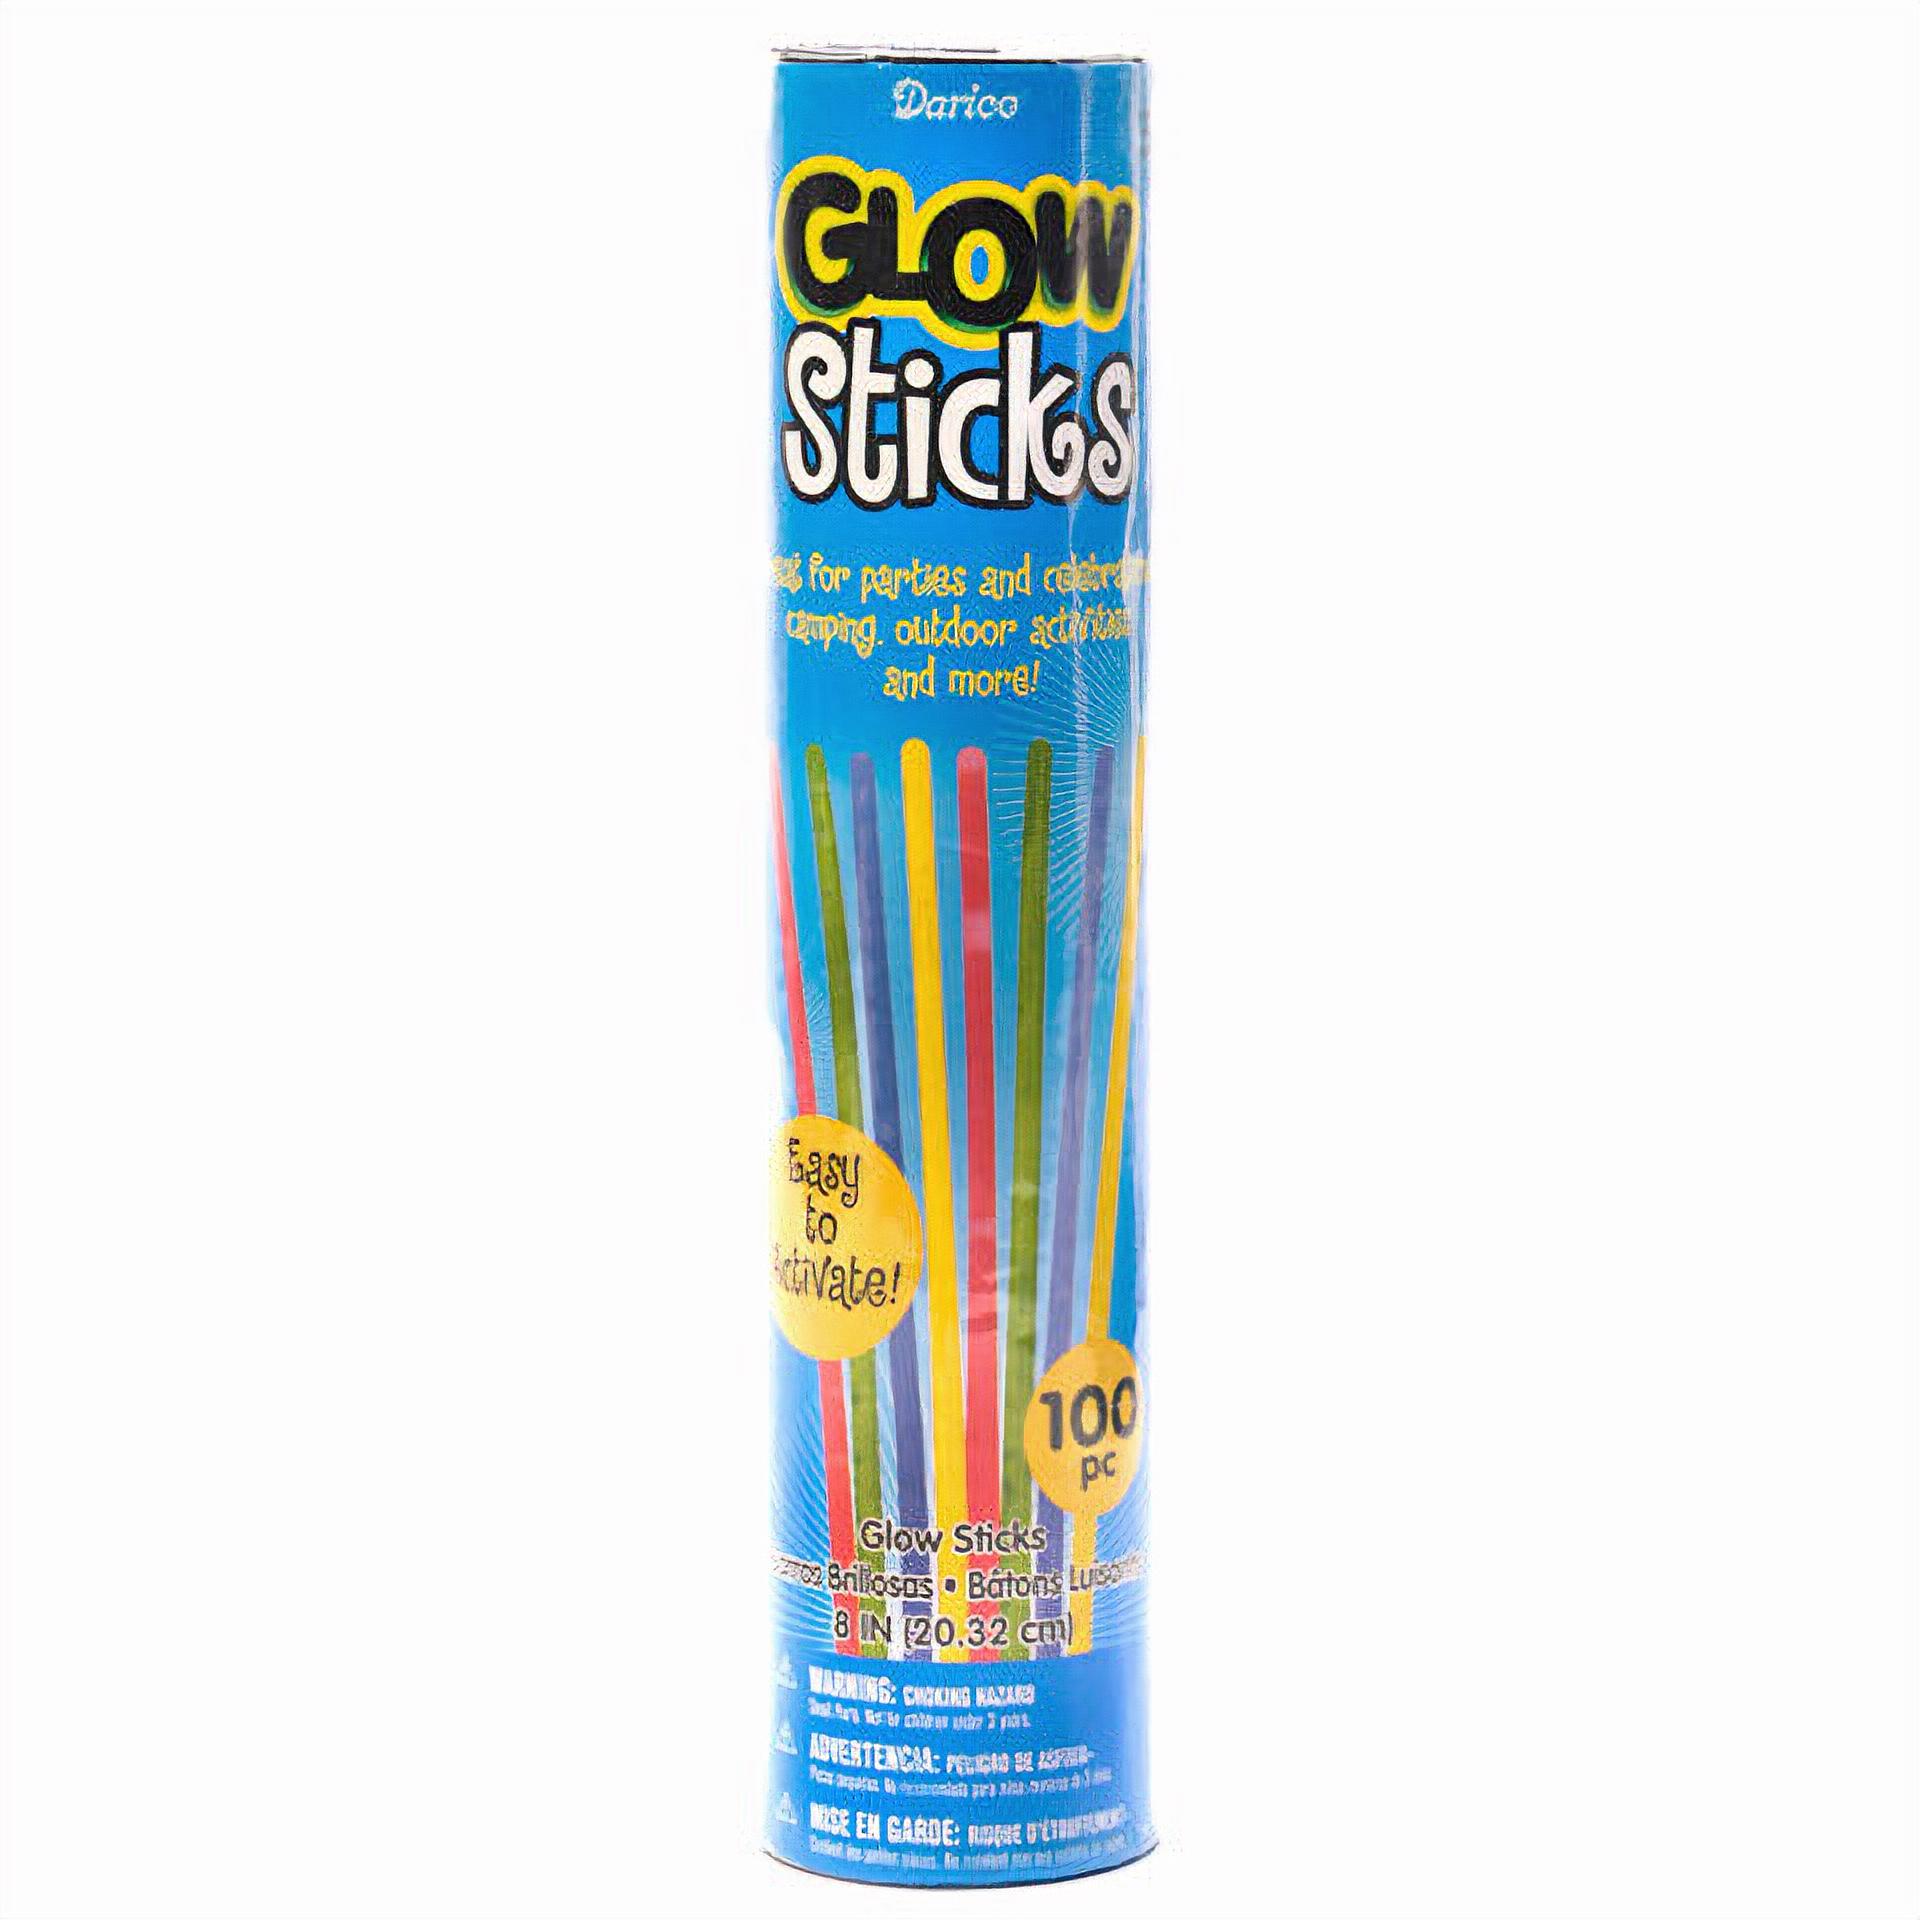 Glow Sticks Party Tube - 10.5 inches - 100 pieces - image 1 of 2